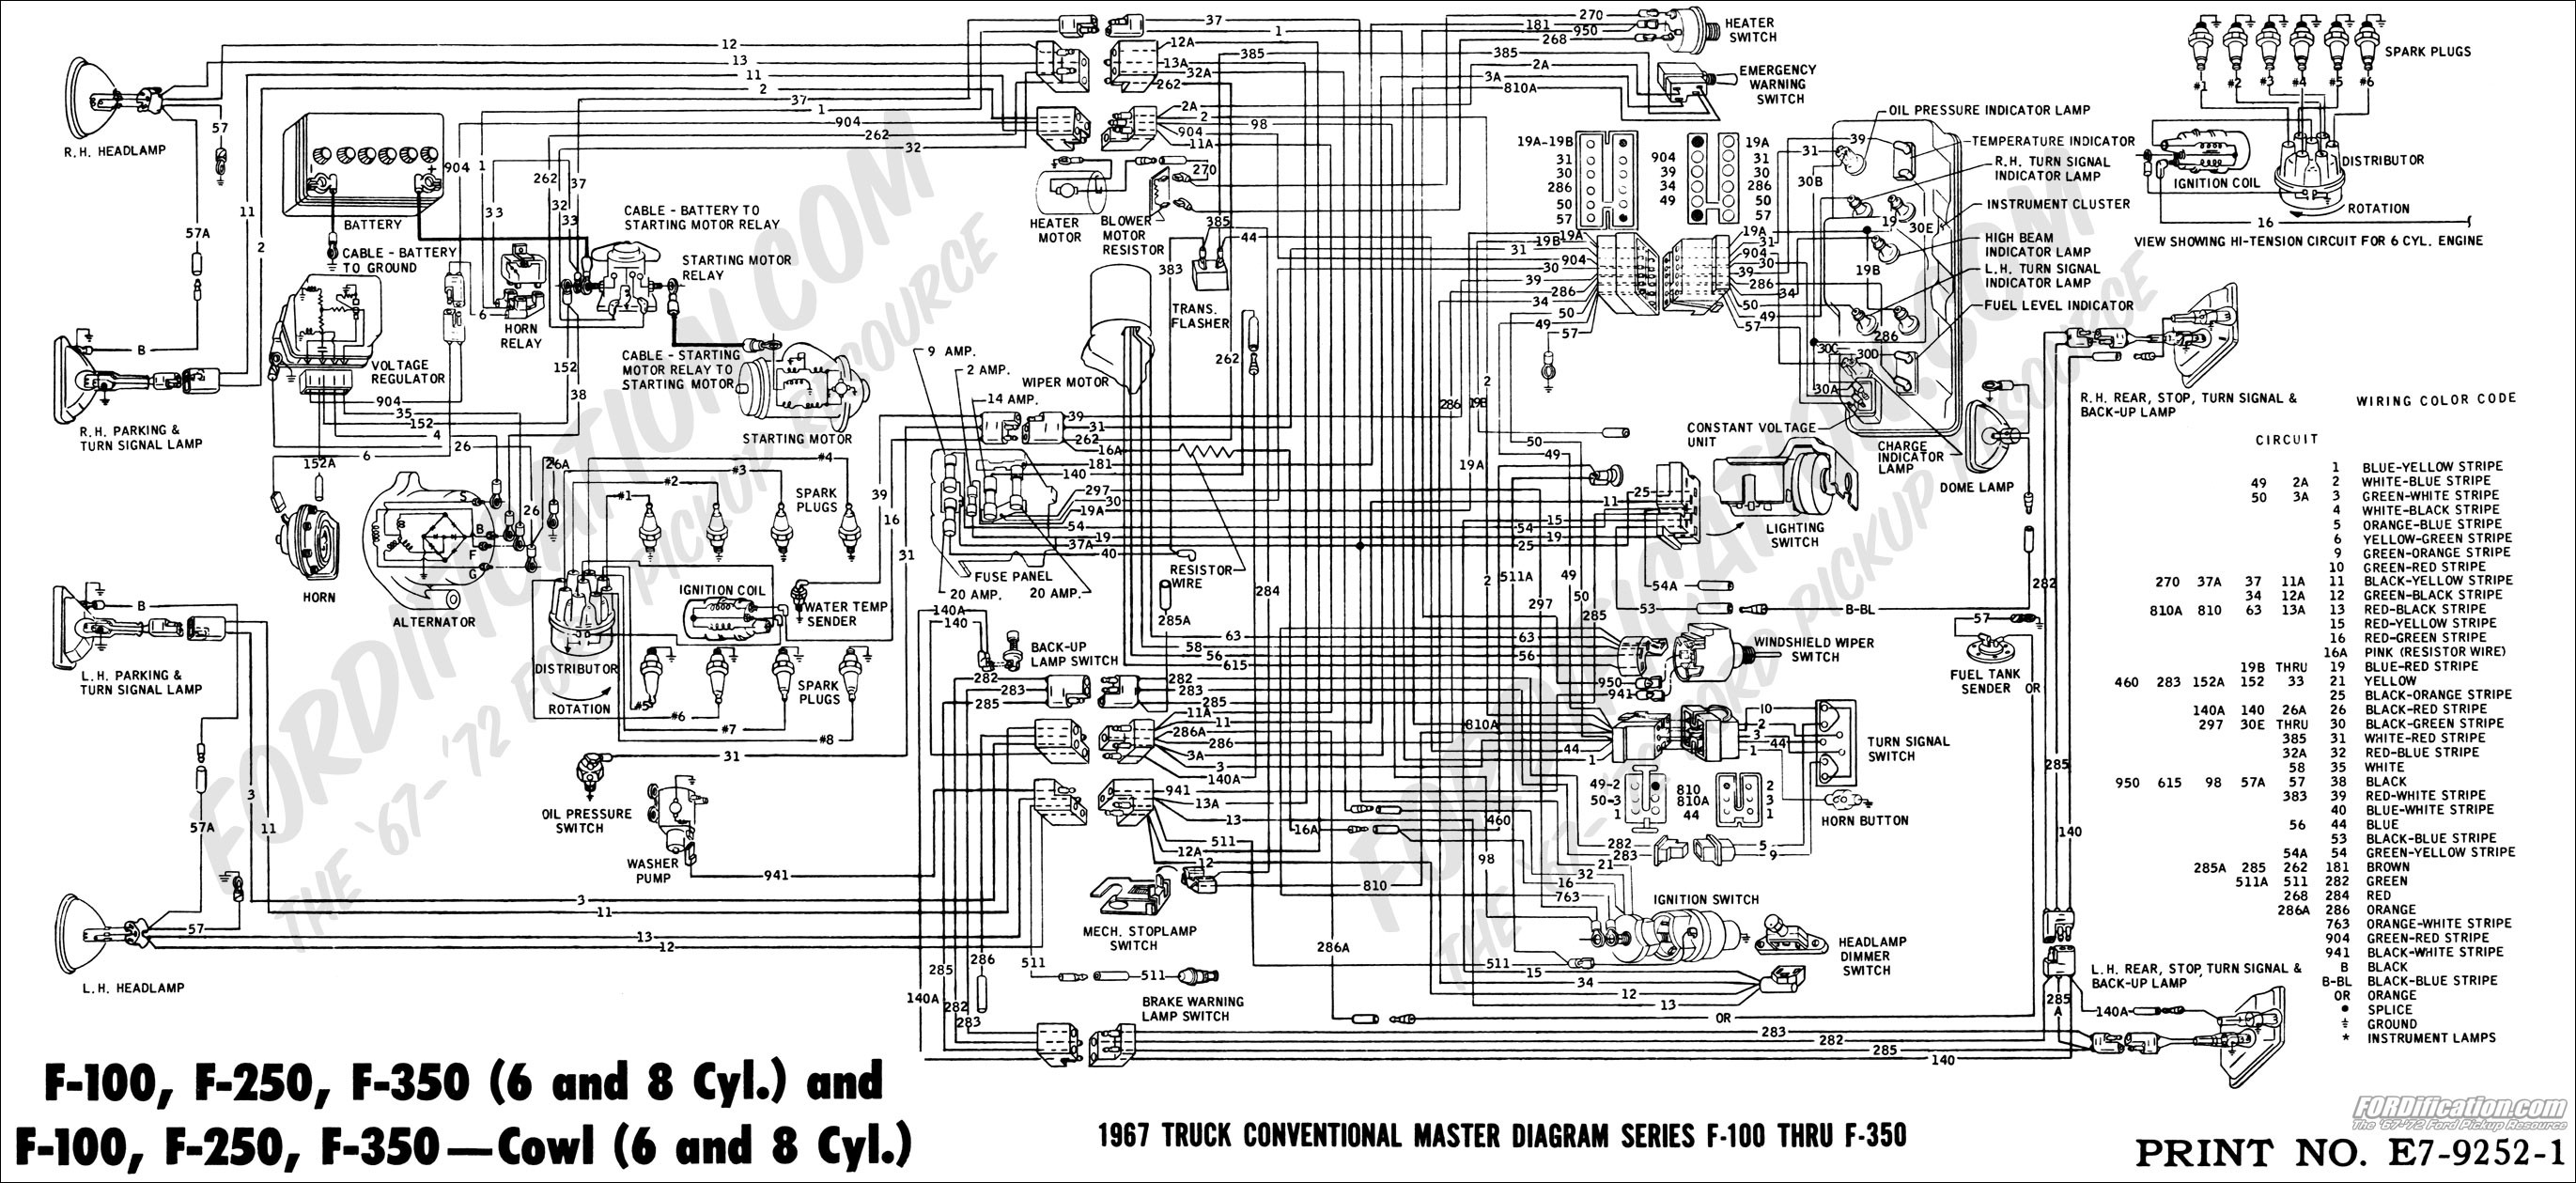 Ford Ranger Parts Diagram ford Truck Technical Drawings and Schematics Section H Wiring Of Ford Ranger Parts Diagram